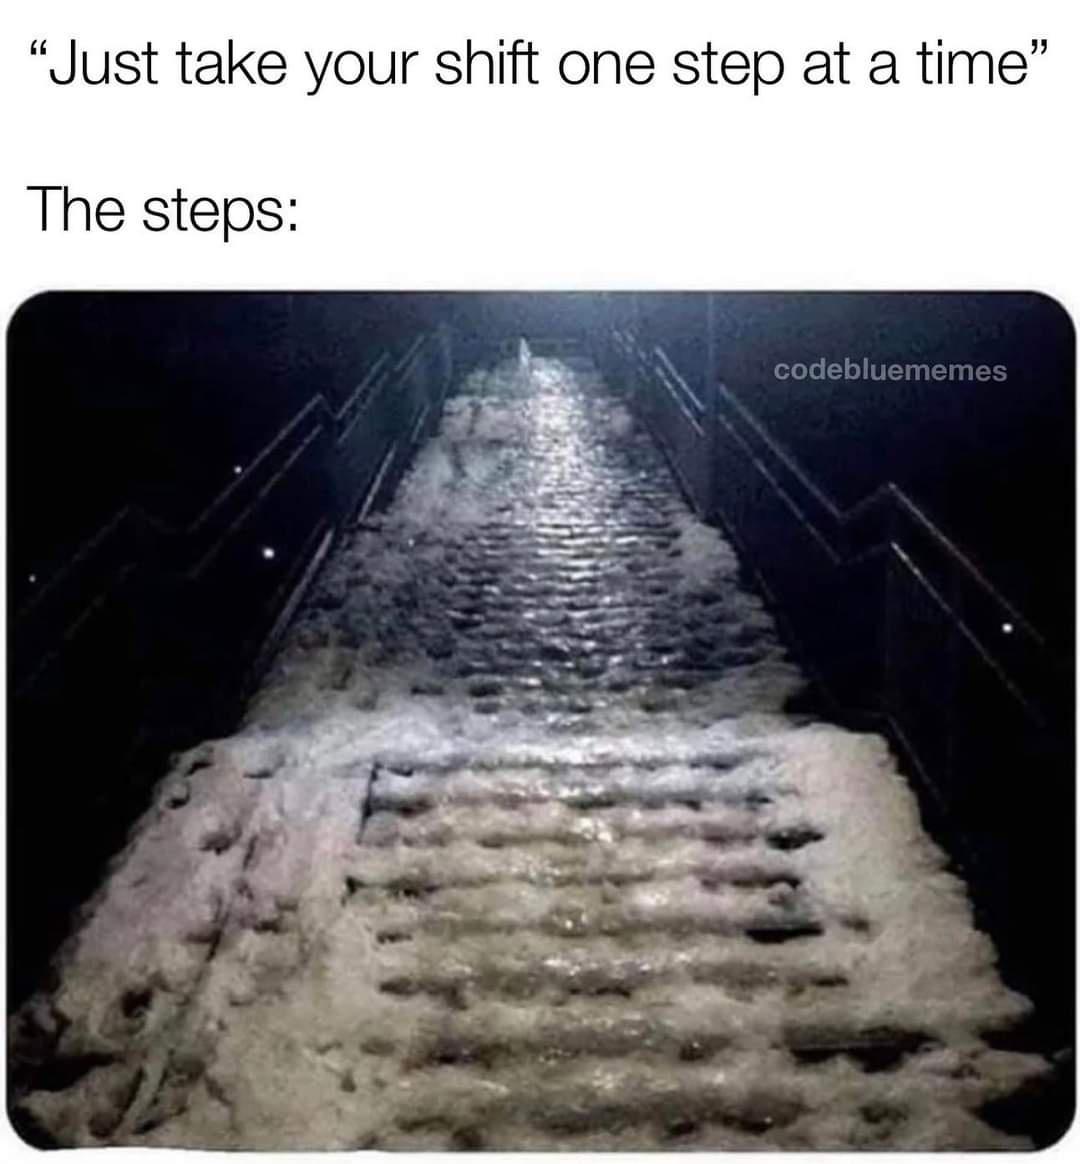 monday morning randomness - new hampshire memes - Just take your shift one step at a time" The steps codebluememes